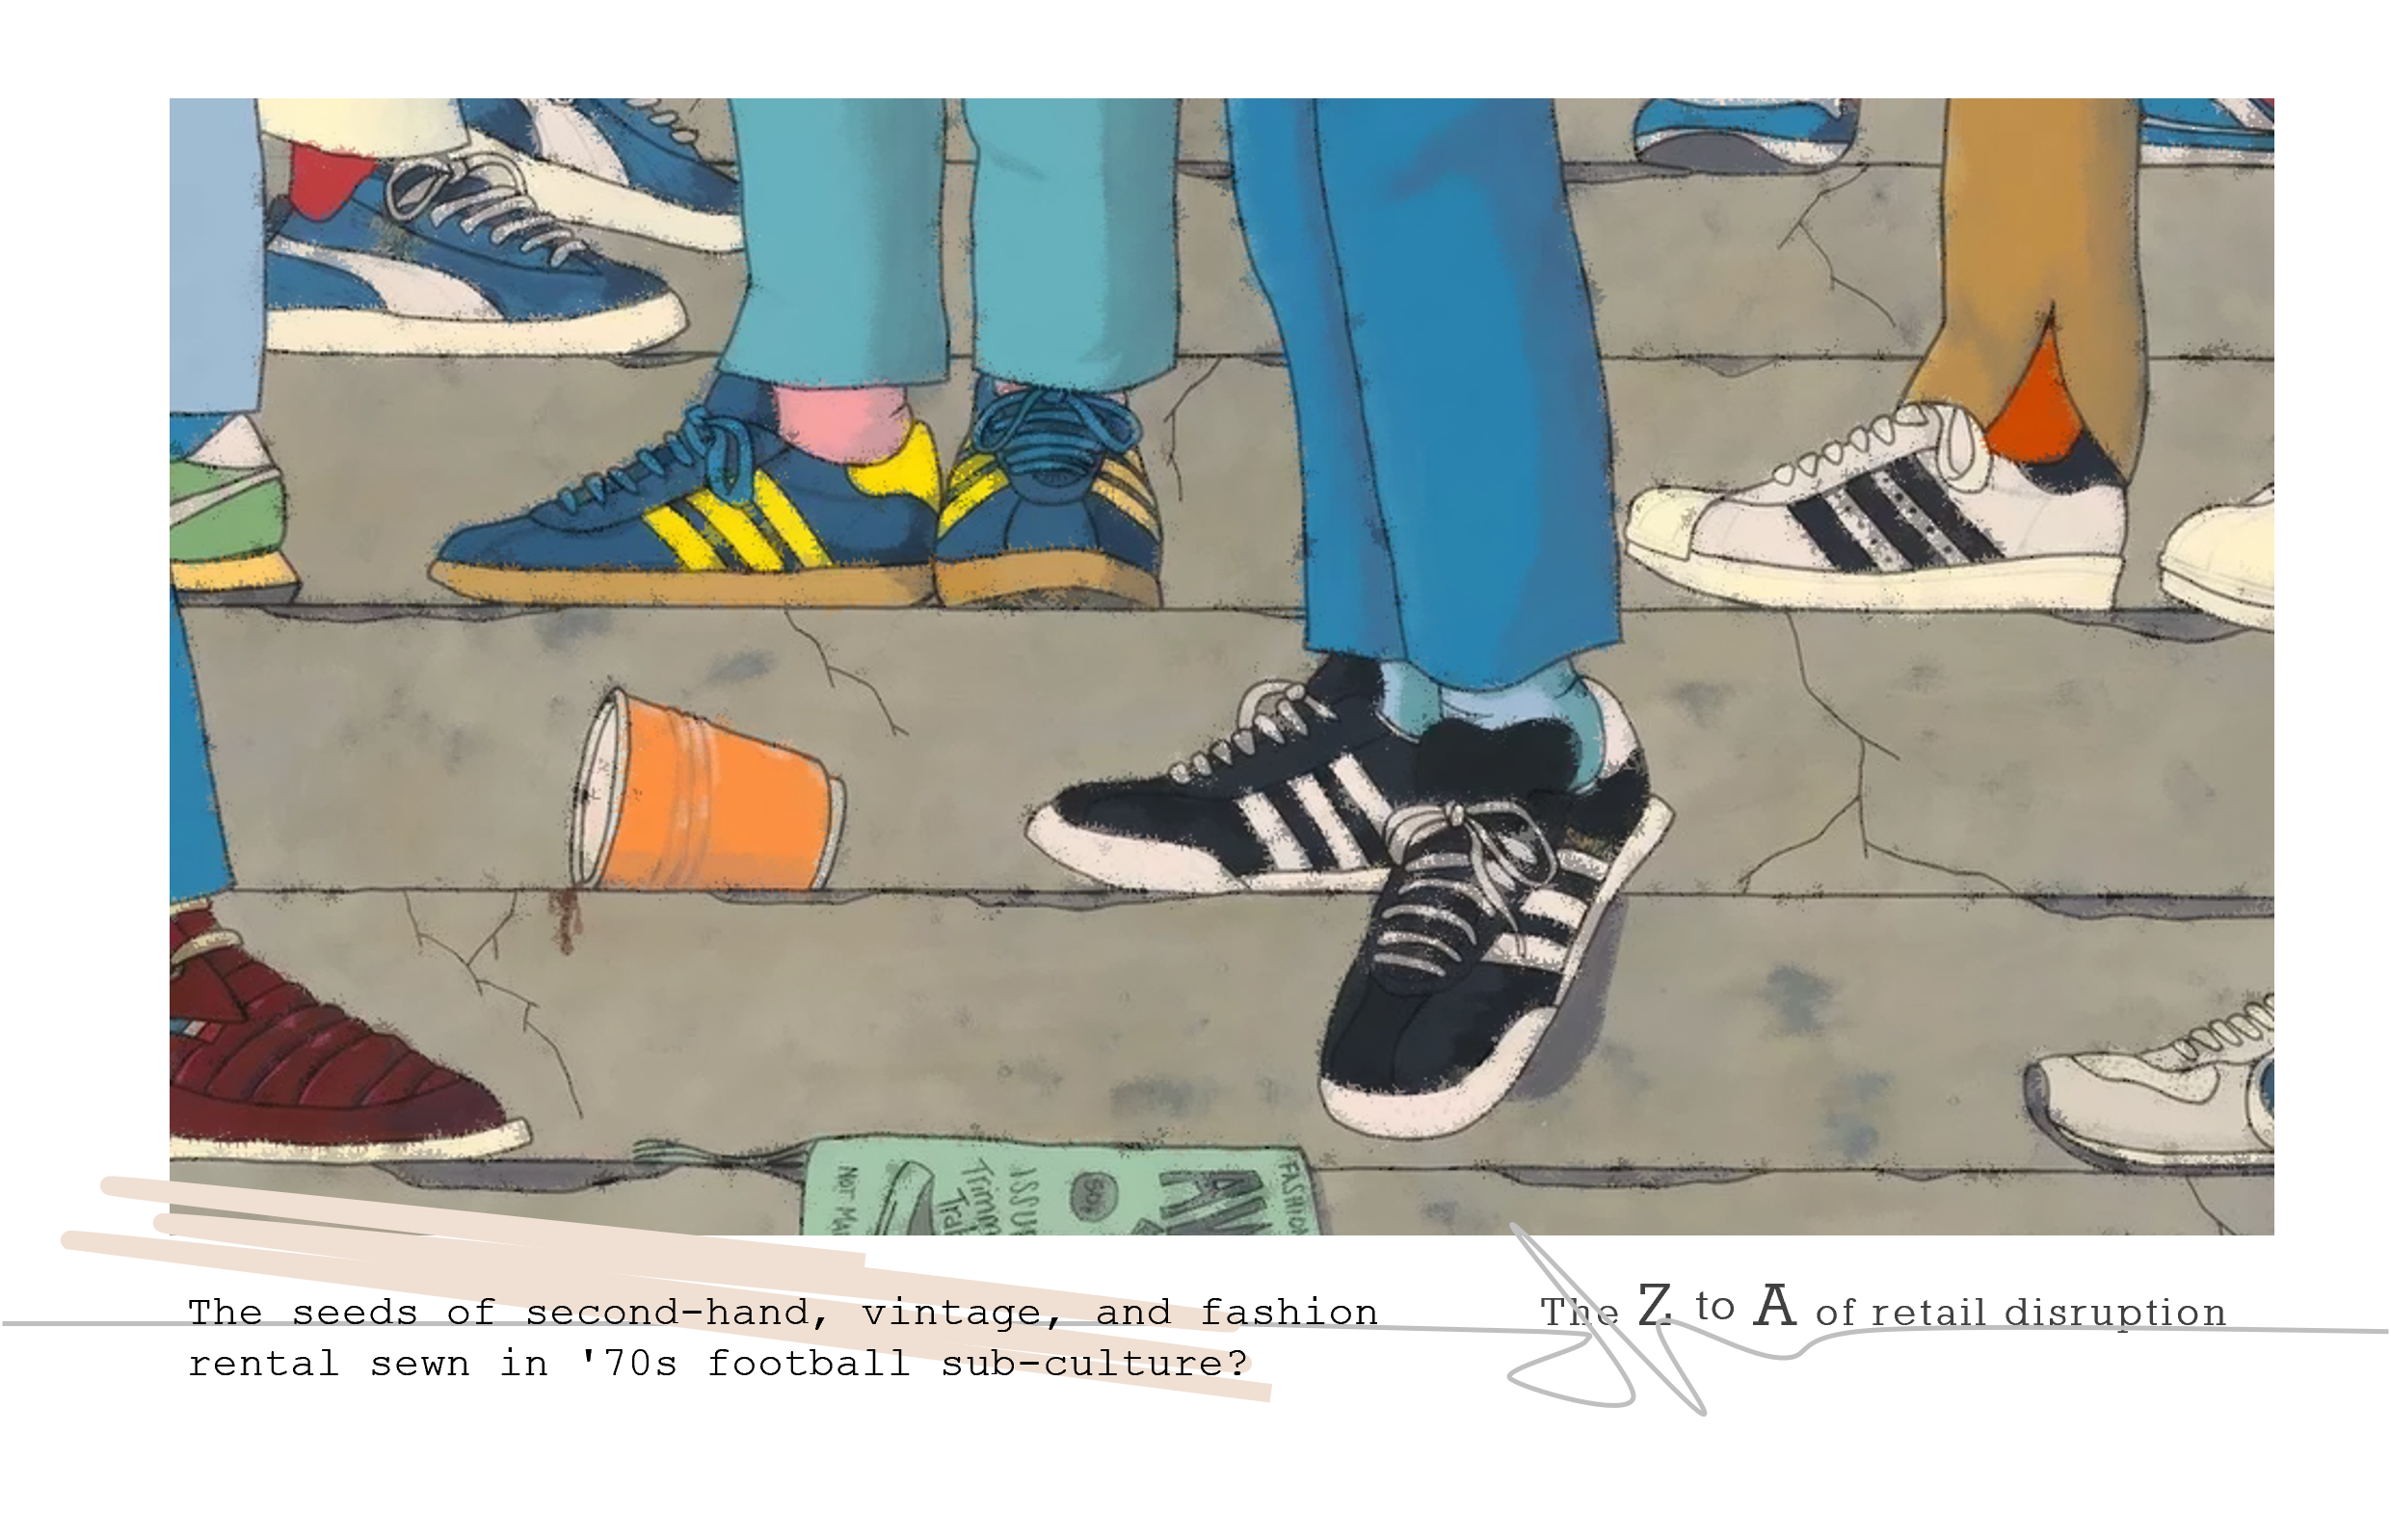 Were the seeds of second-hand, vintage, and fashion rental sewn in ’70s football sub-culture?